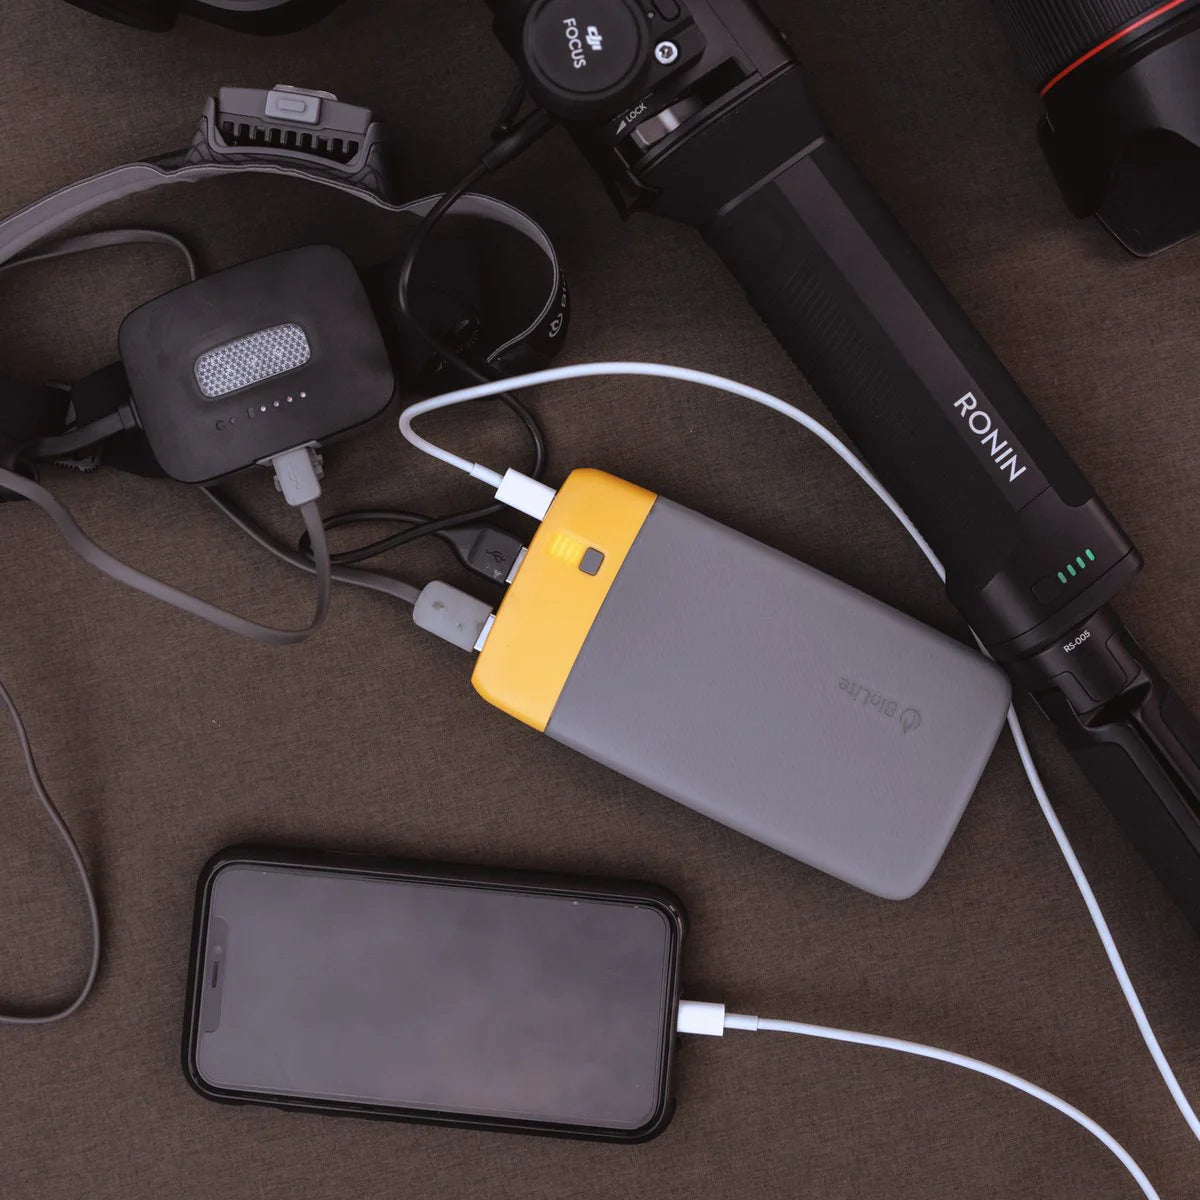 Biolite Charge 80 PD Power Bank